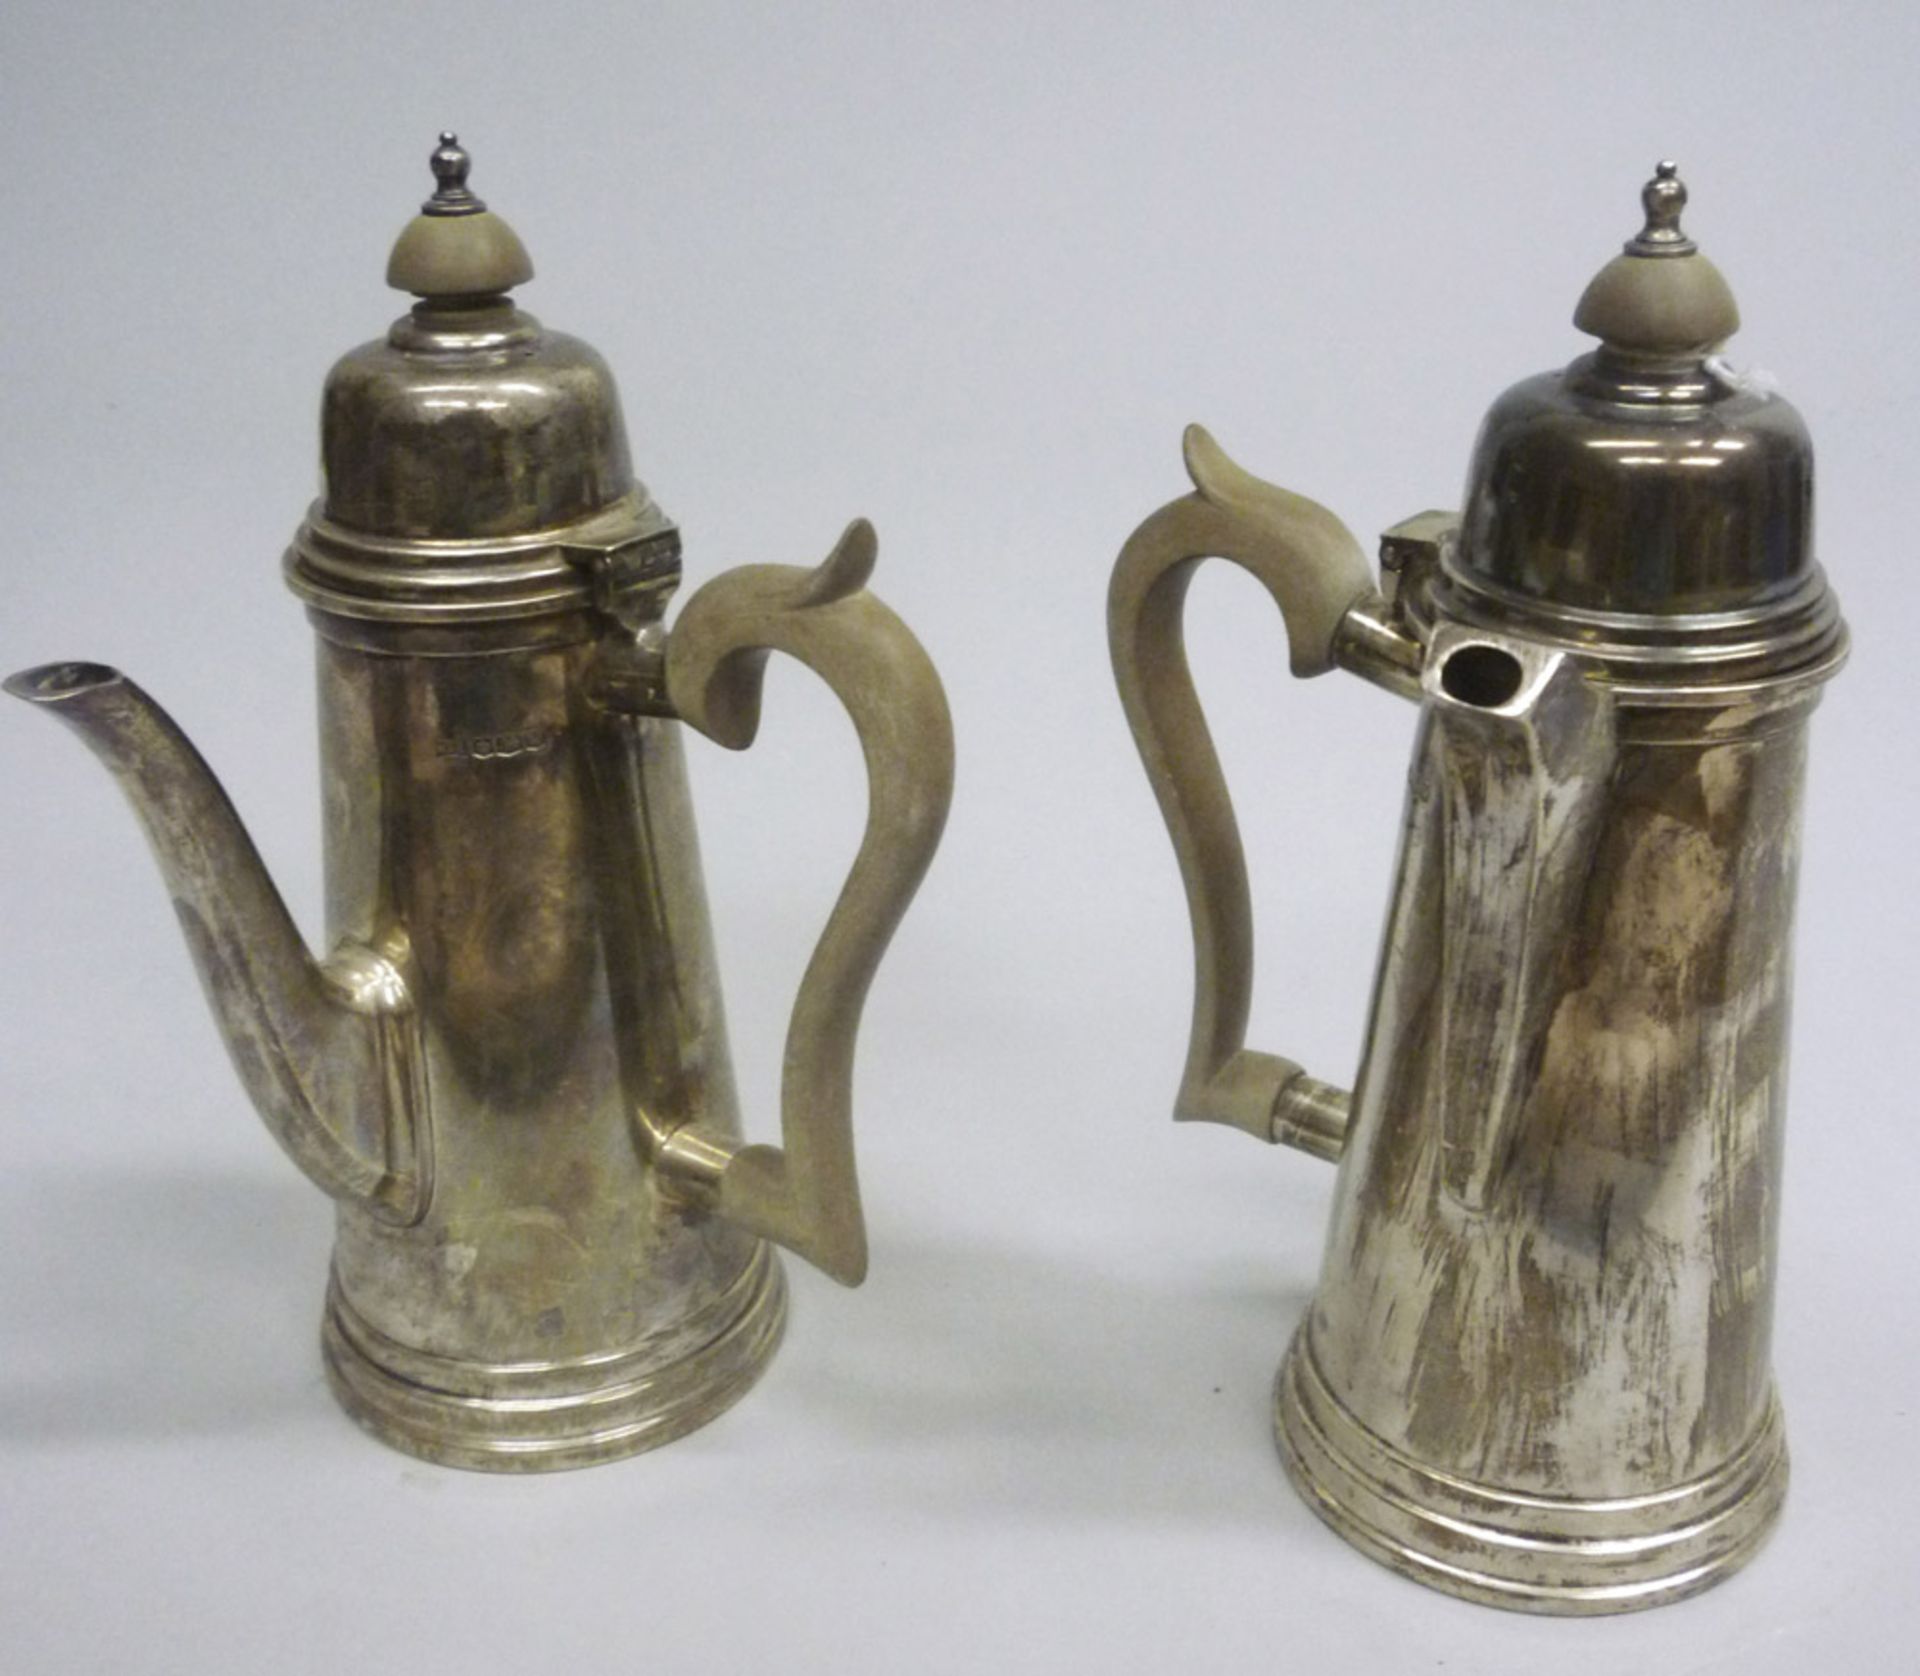 Couple of milk jugs in Sheffield with handles and knob in wood. England early 20th century.